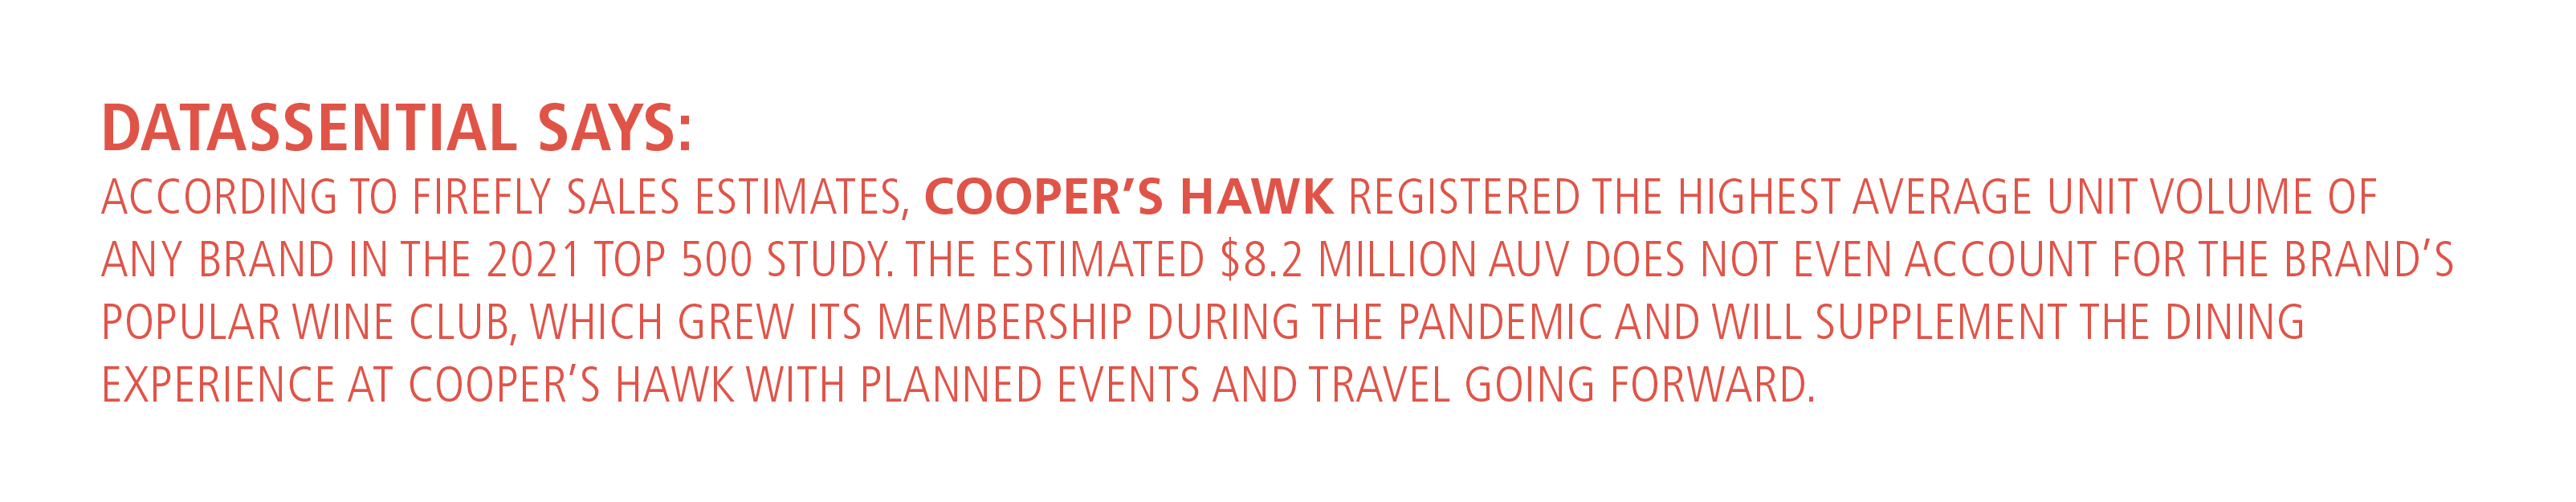 Coopers Hawk continues diversification, with more growth ahead | Nation's Restaurant News